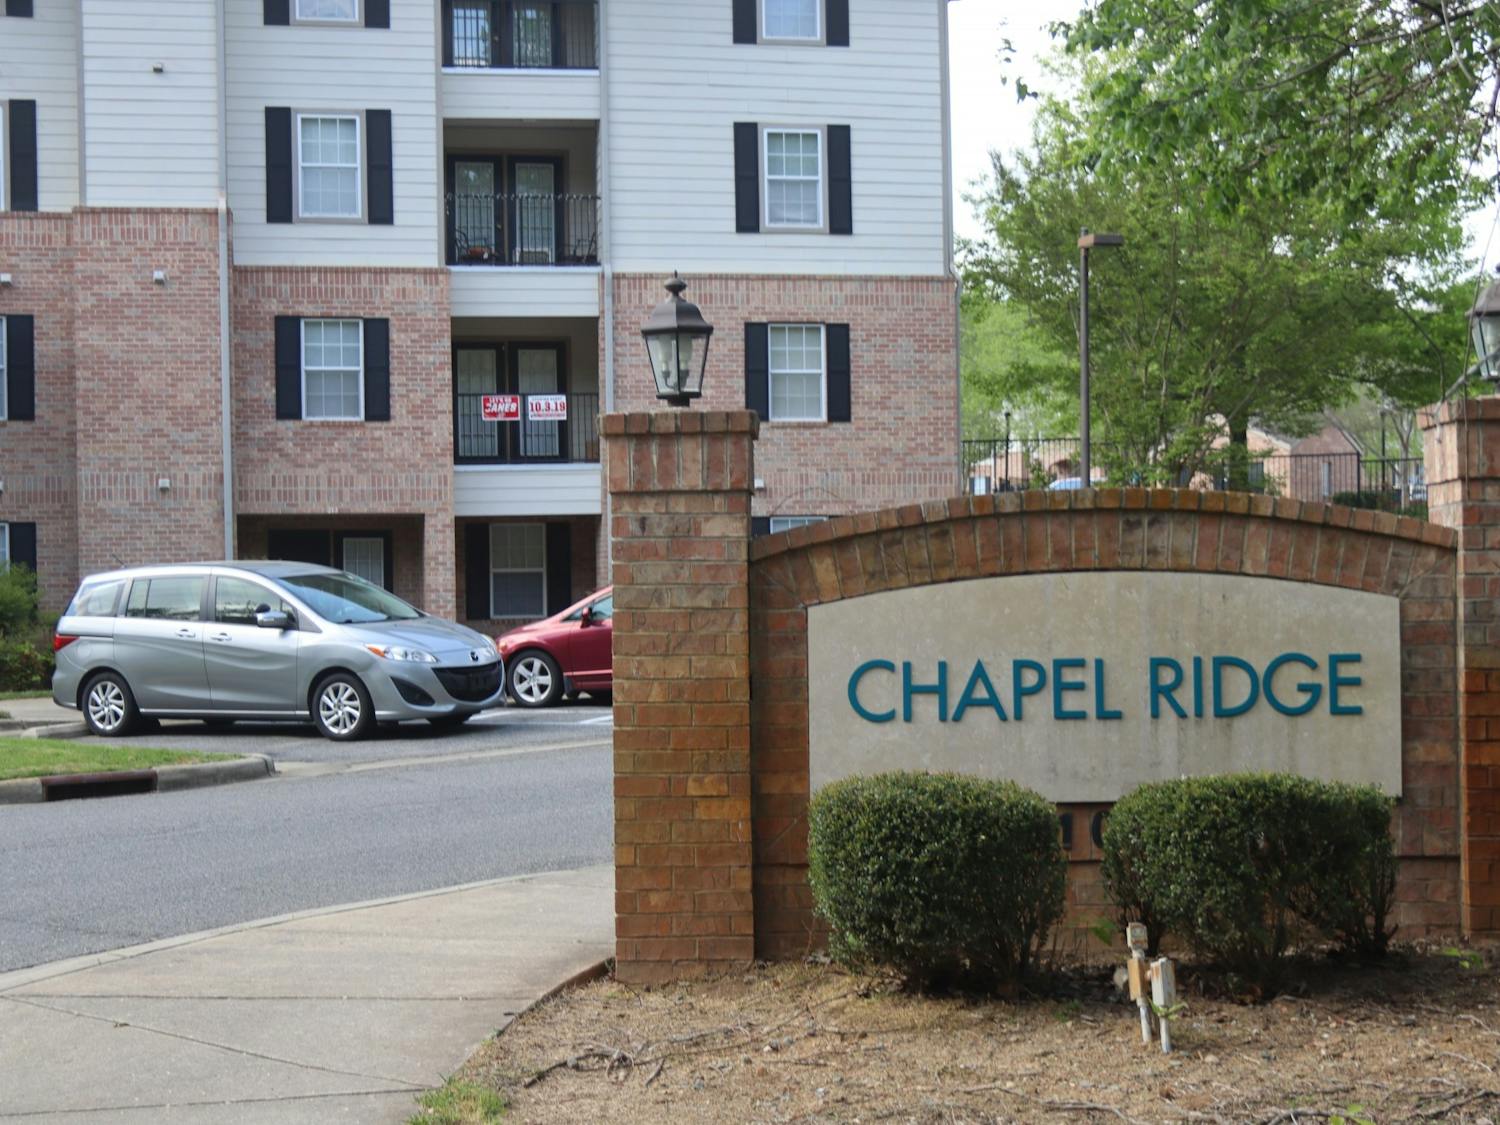 Chapel Ridge Apartments is an off-campus apartment complex where many UNC students live.